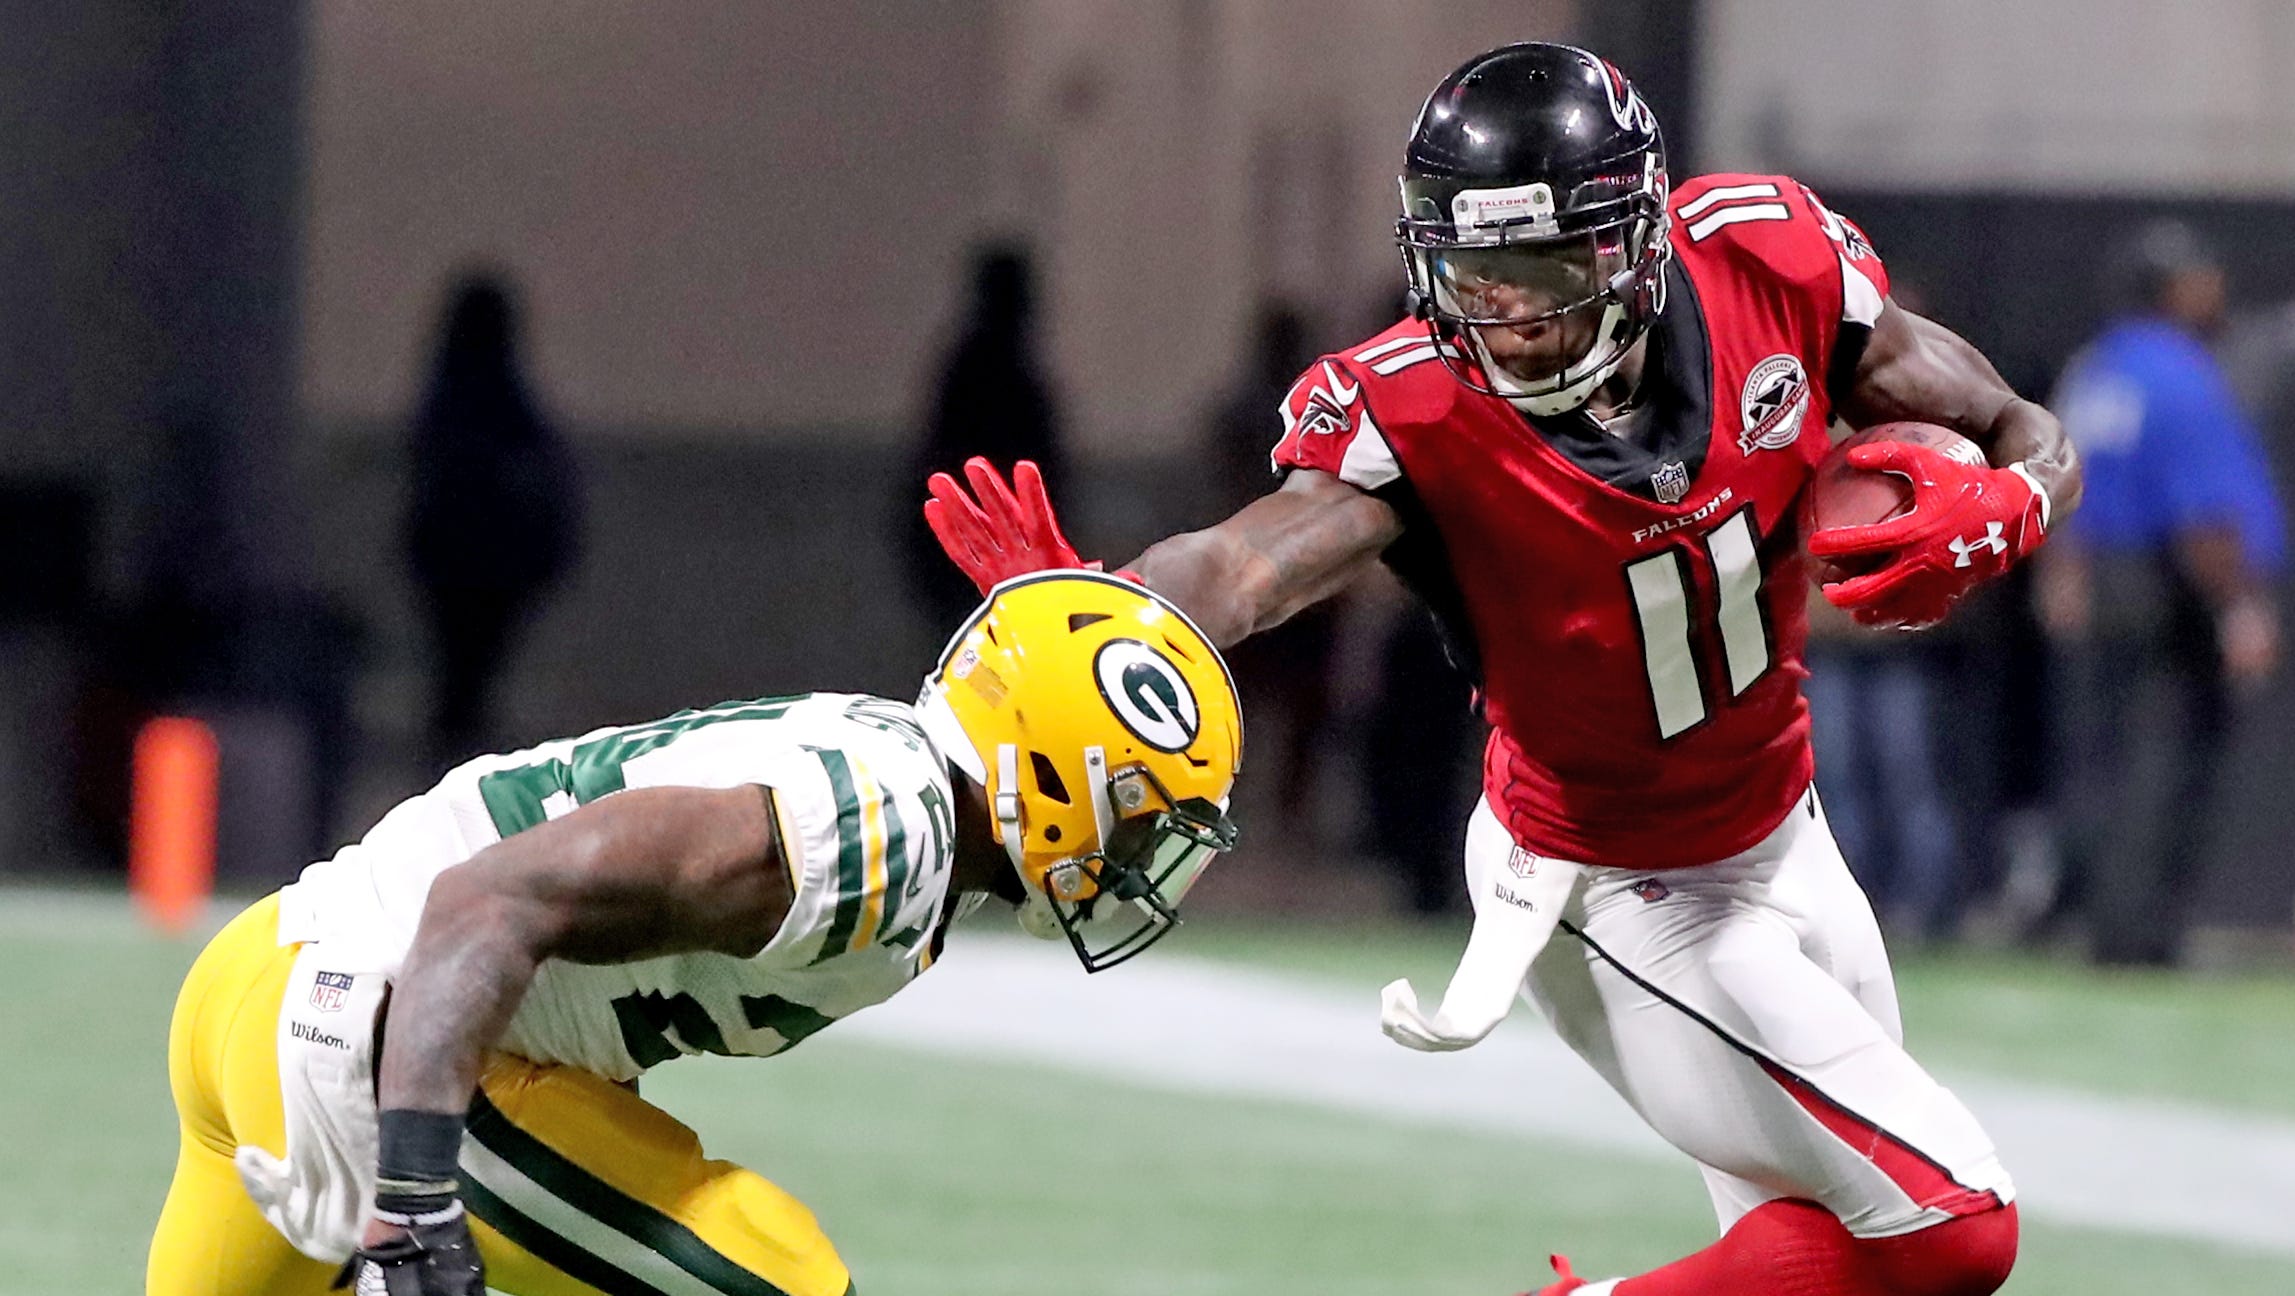 Green Bay Packers cornerback Quinten Rollins (24) gives up a catch to Atlanta Falcons wide receiver Julio Jones (11) on Sept. 17, 2017, at Mercedes-Benz Stadium in Atlanta.